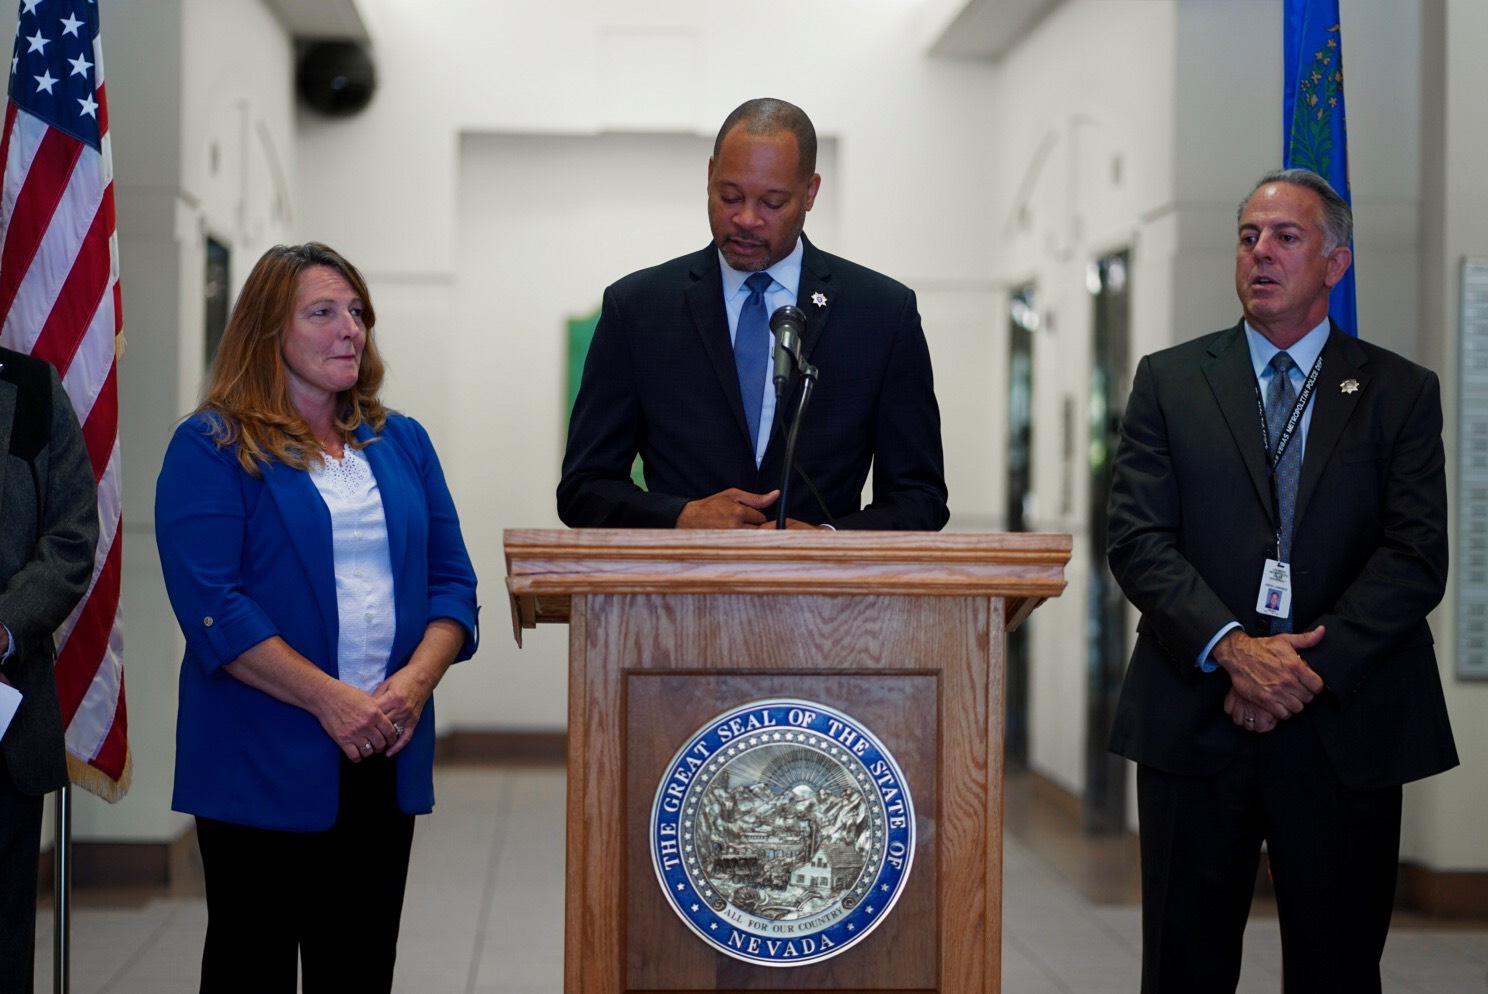 Attorney General Aaron Ford at a press conference announcing the expanded complaint against opioid manufacturers, distributors, pharmacies and individuals.